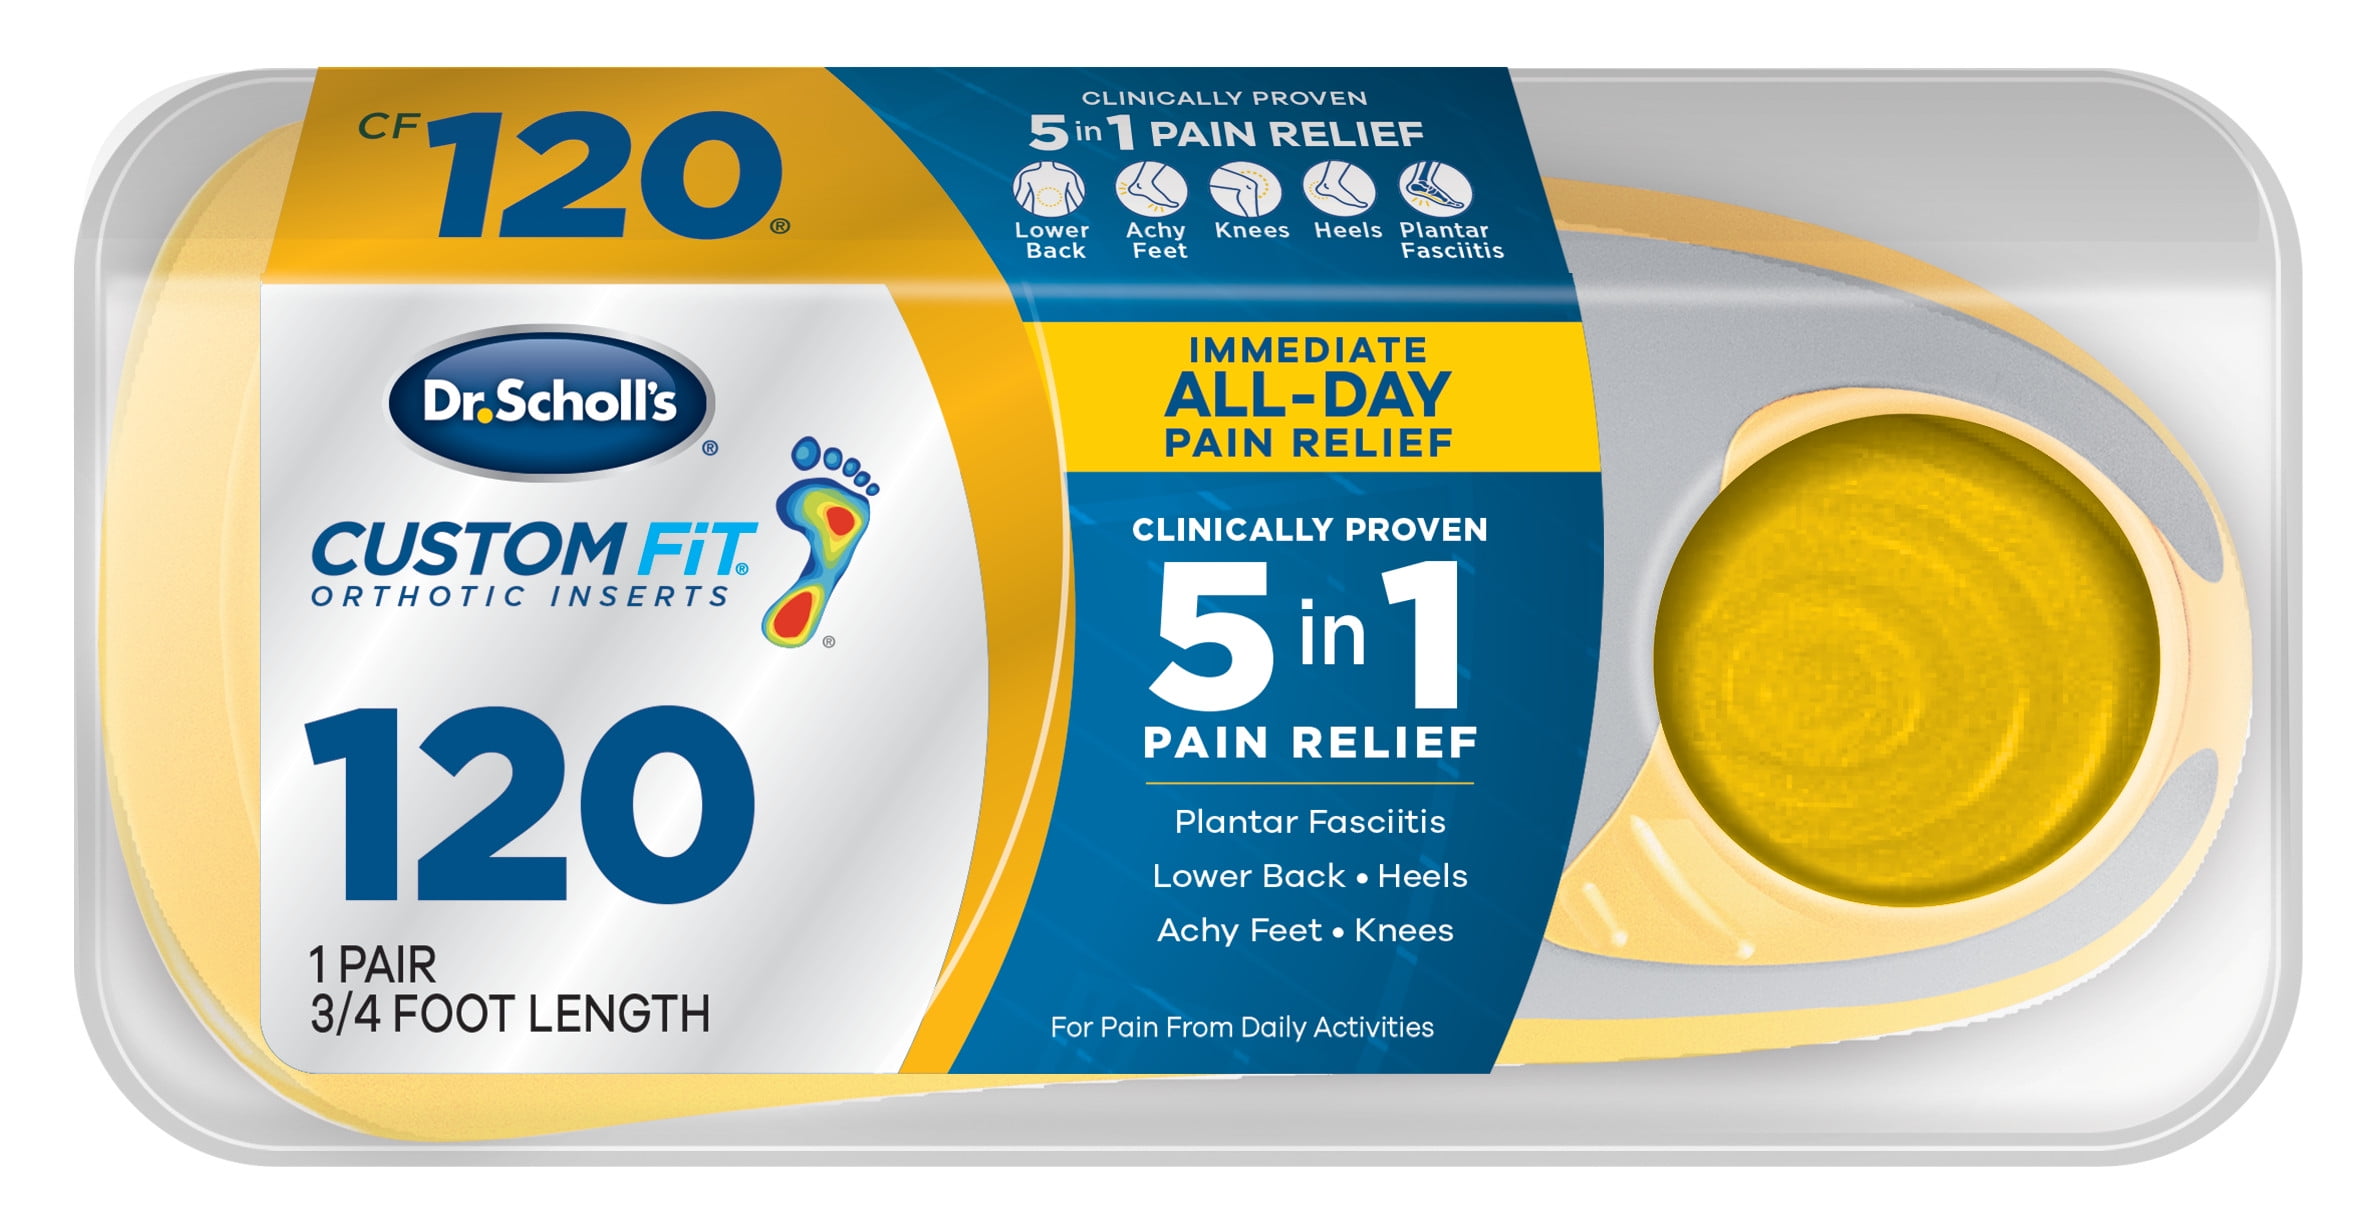 Dr Scholls Custom Fit CF 120 Orthotic Insole Shoe Inserts for Foot Knee and Lower Back Relief 1 Pair